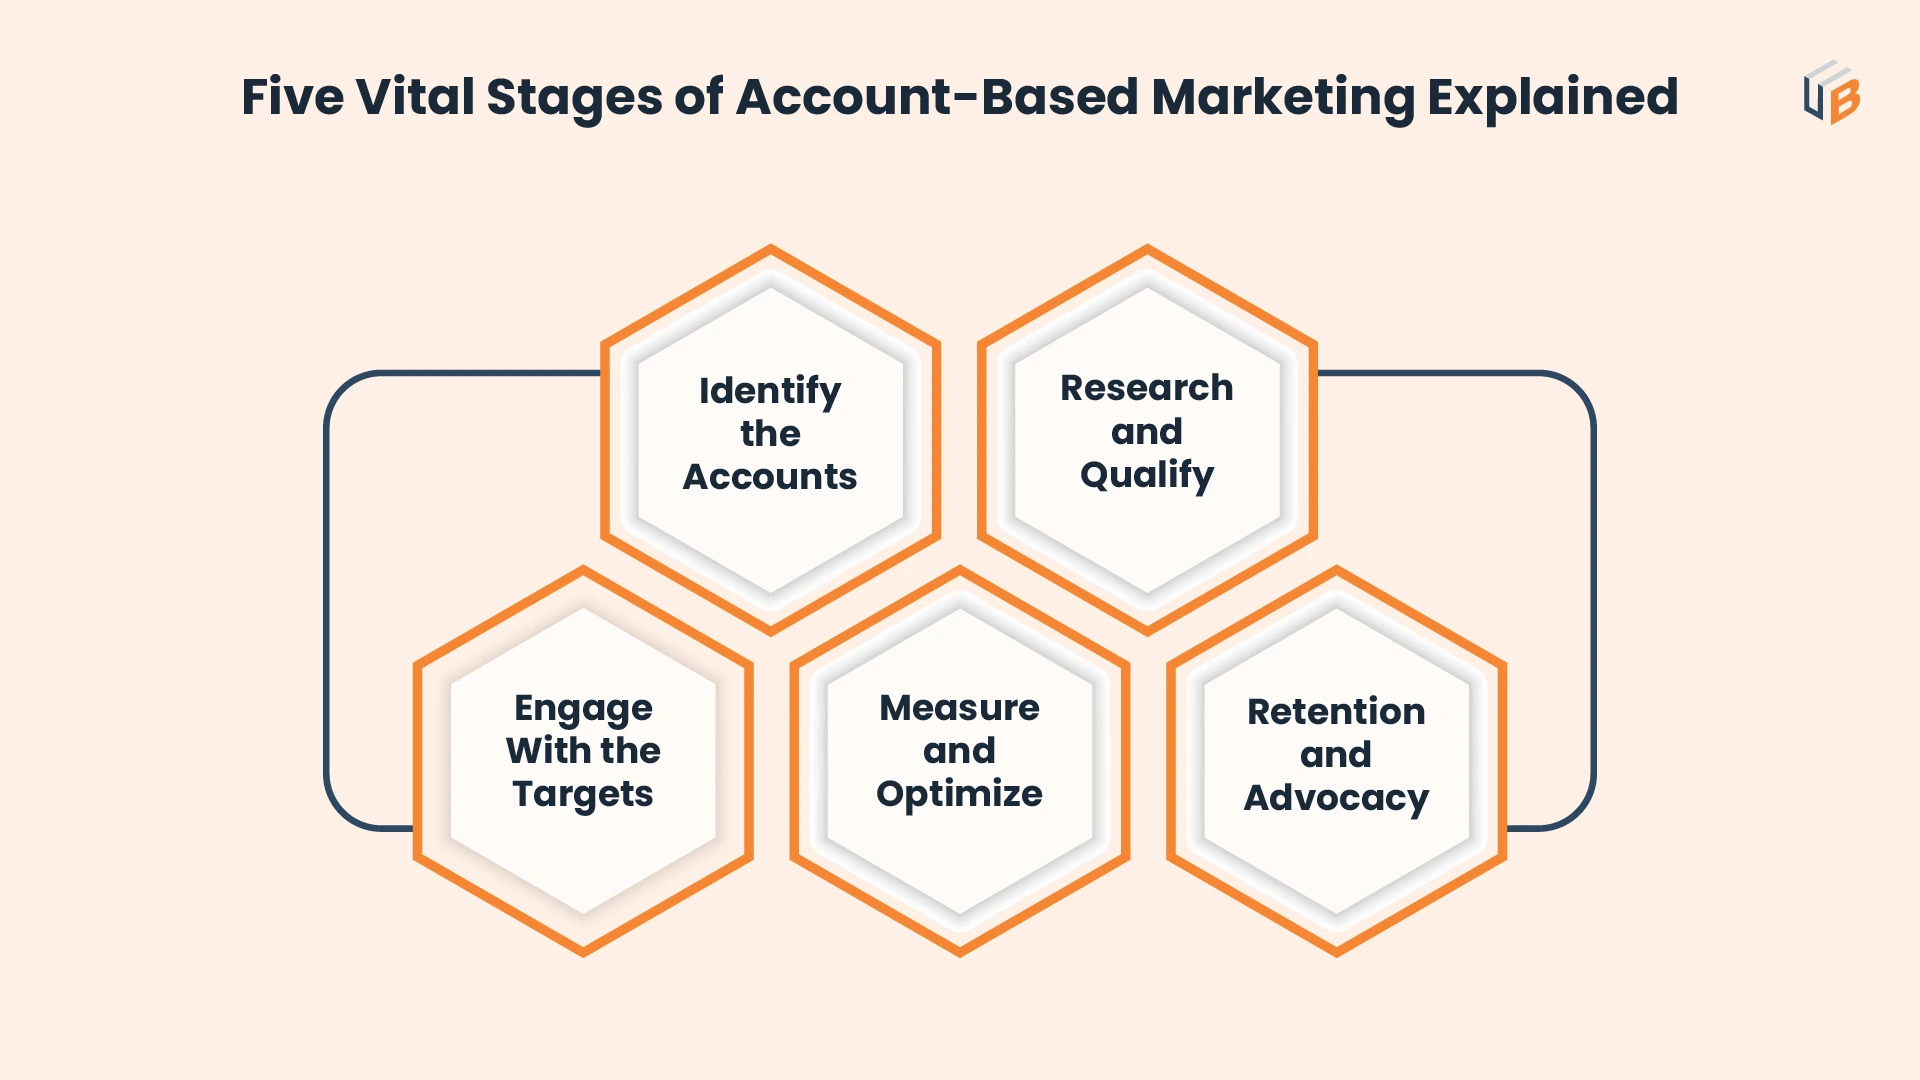 Five Vital Images of Account-Based Marketing